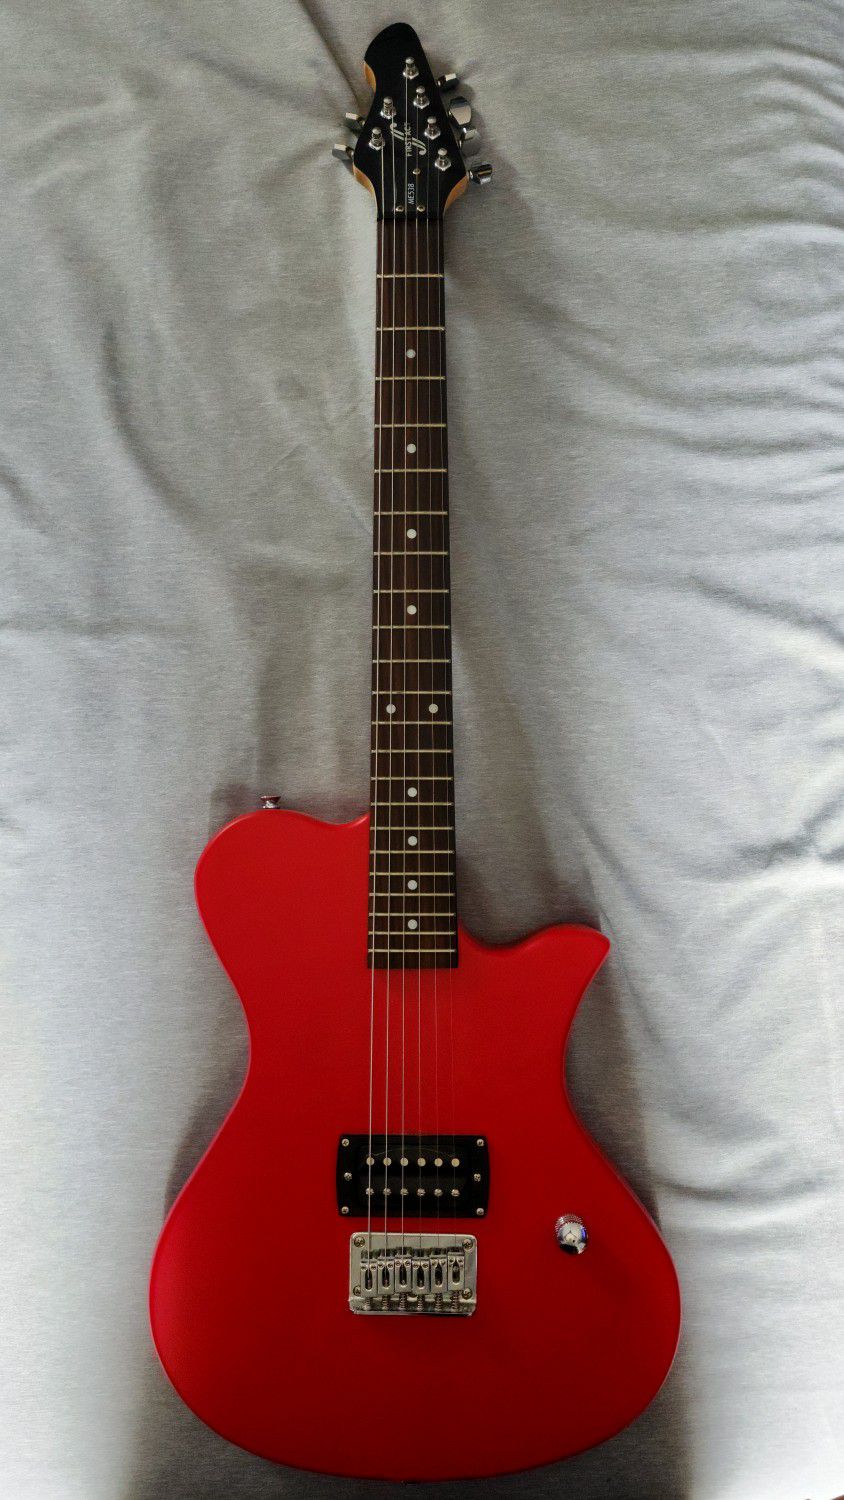 First Act Electric Guitar